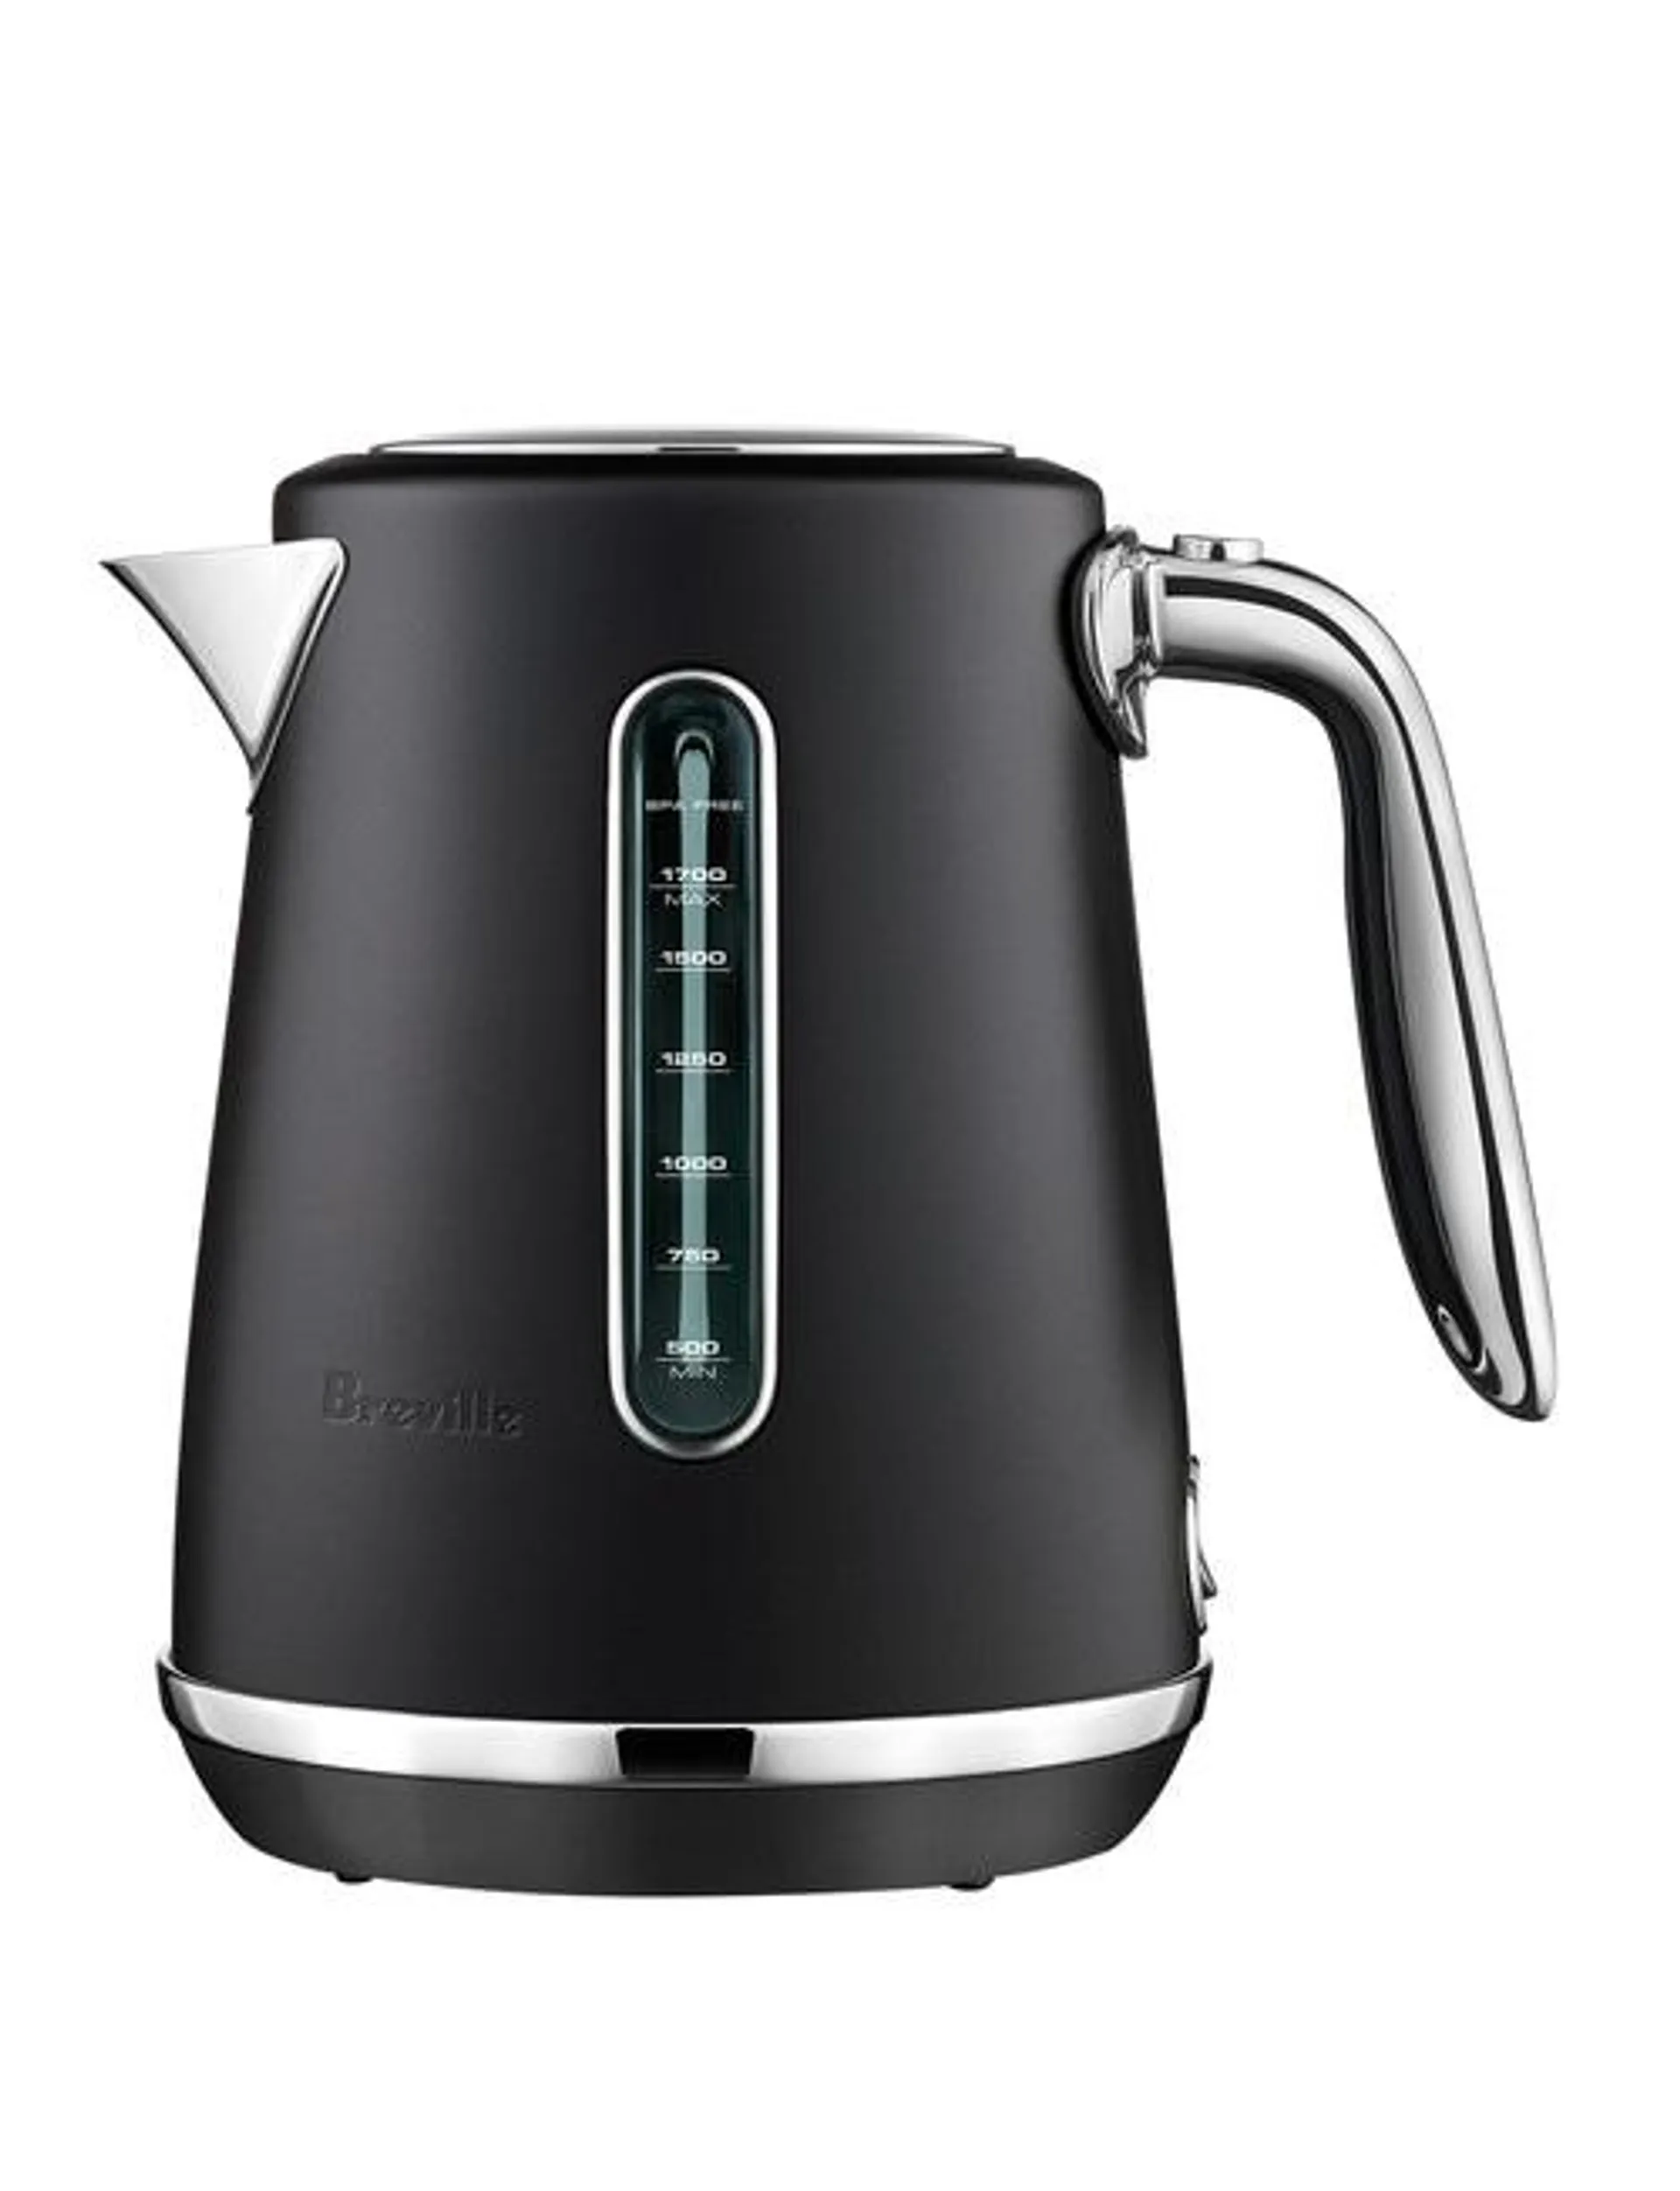 Breville The Soft Top Luxe Kettle, Black Truffle, BKE735BTR